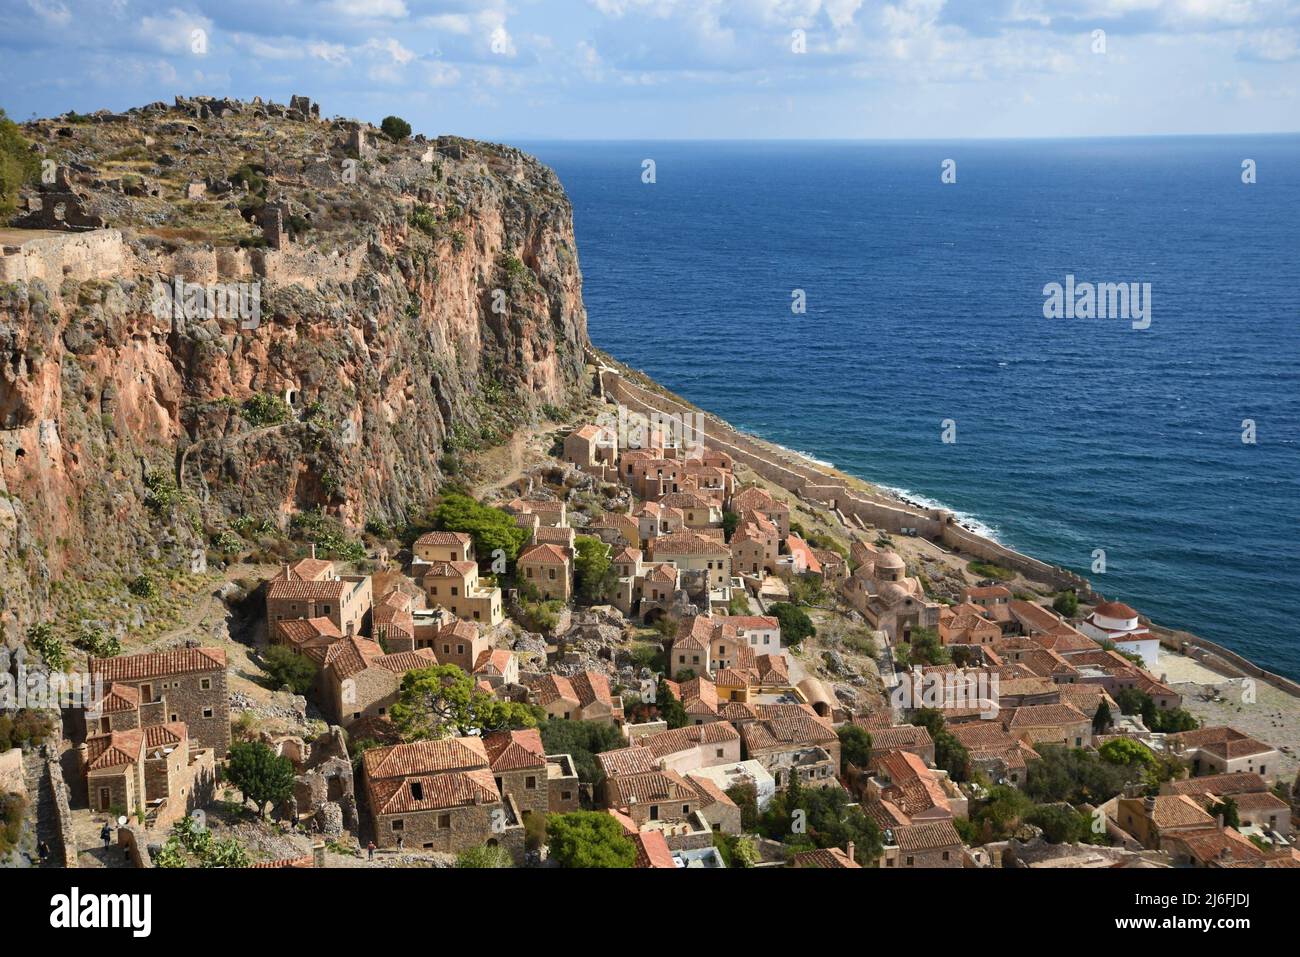 Landscape with panoramic view of Monemvasia a picturesque fortified town in Laconia, Peloponnese Greece. Stock Photo